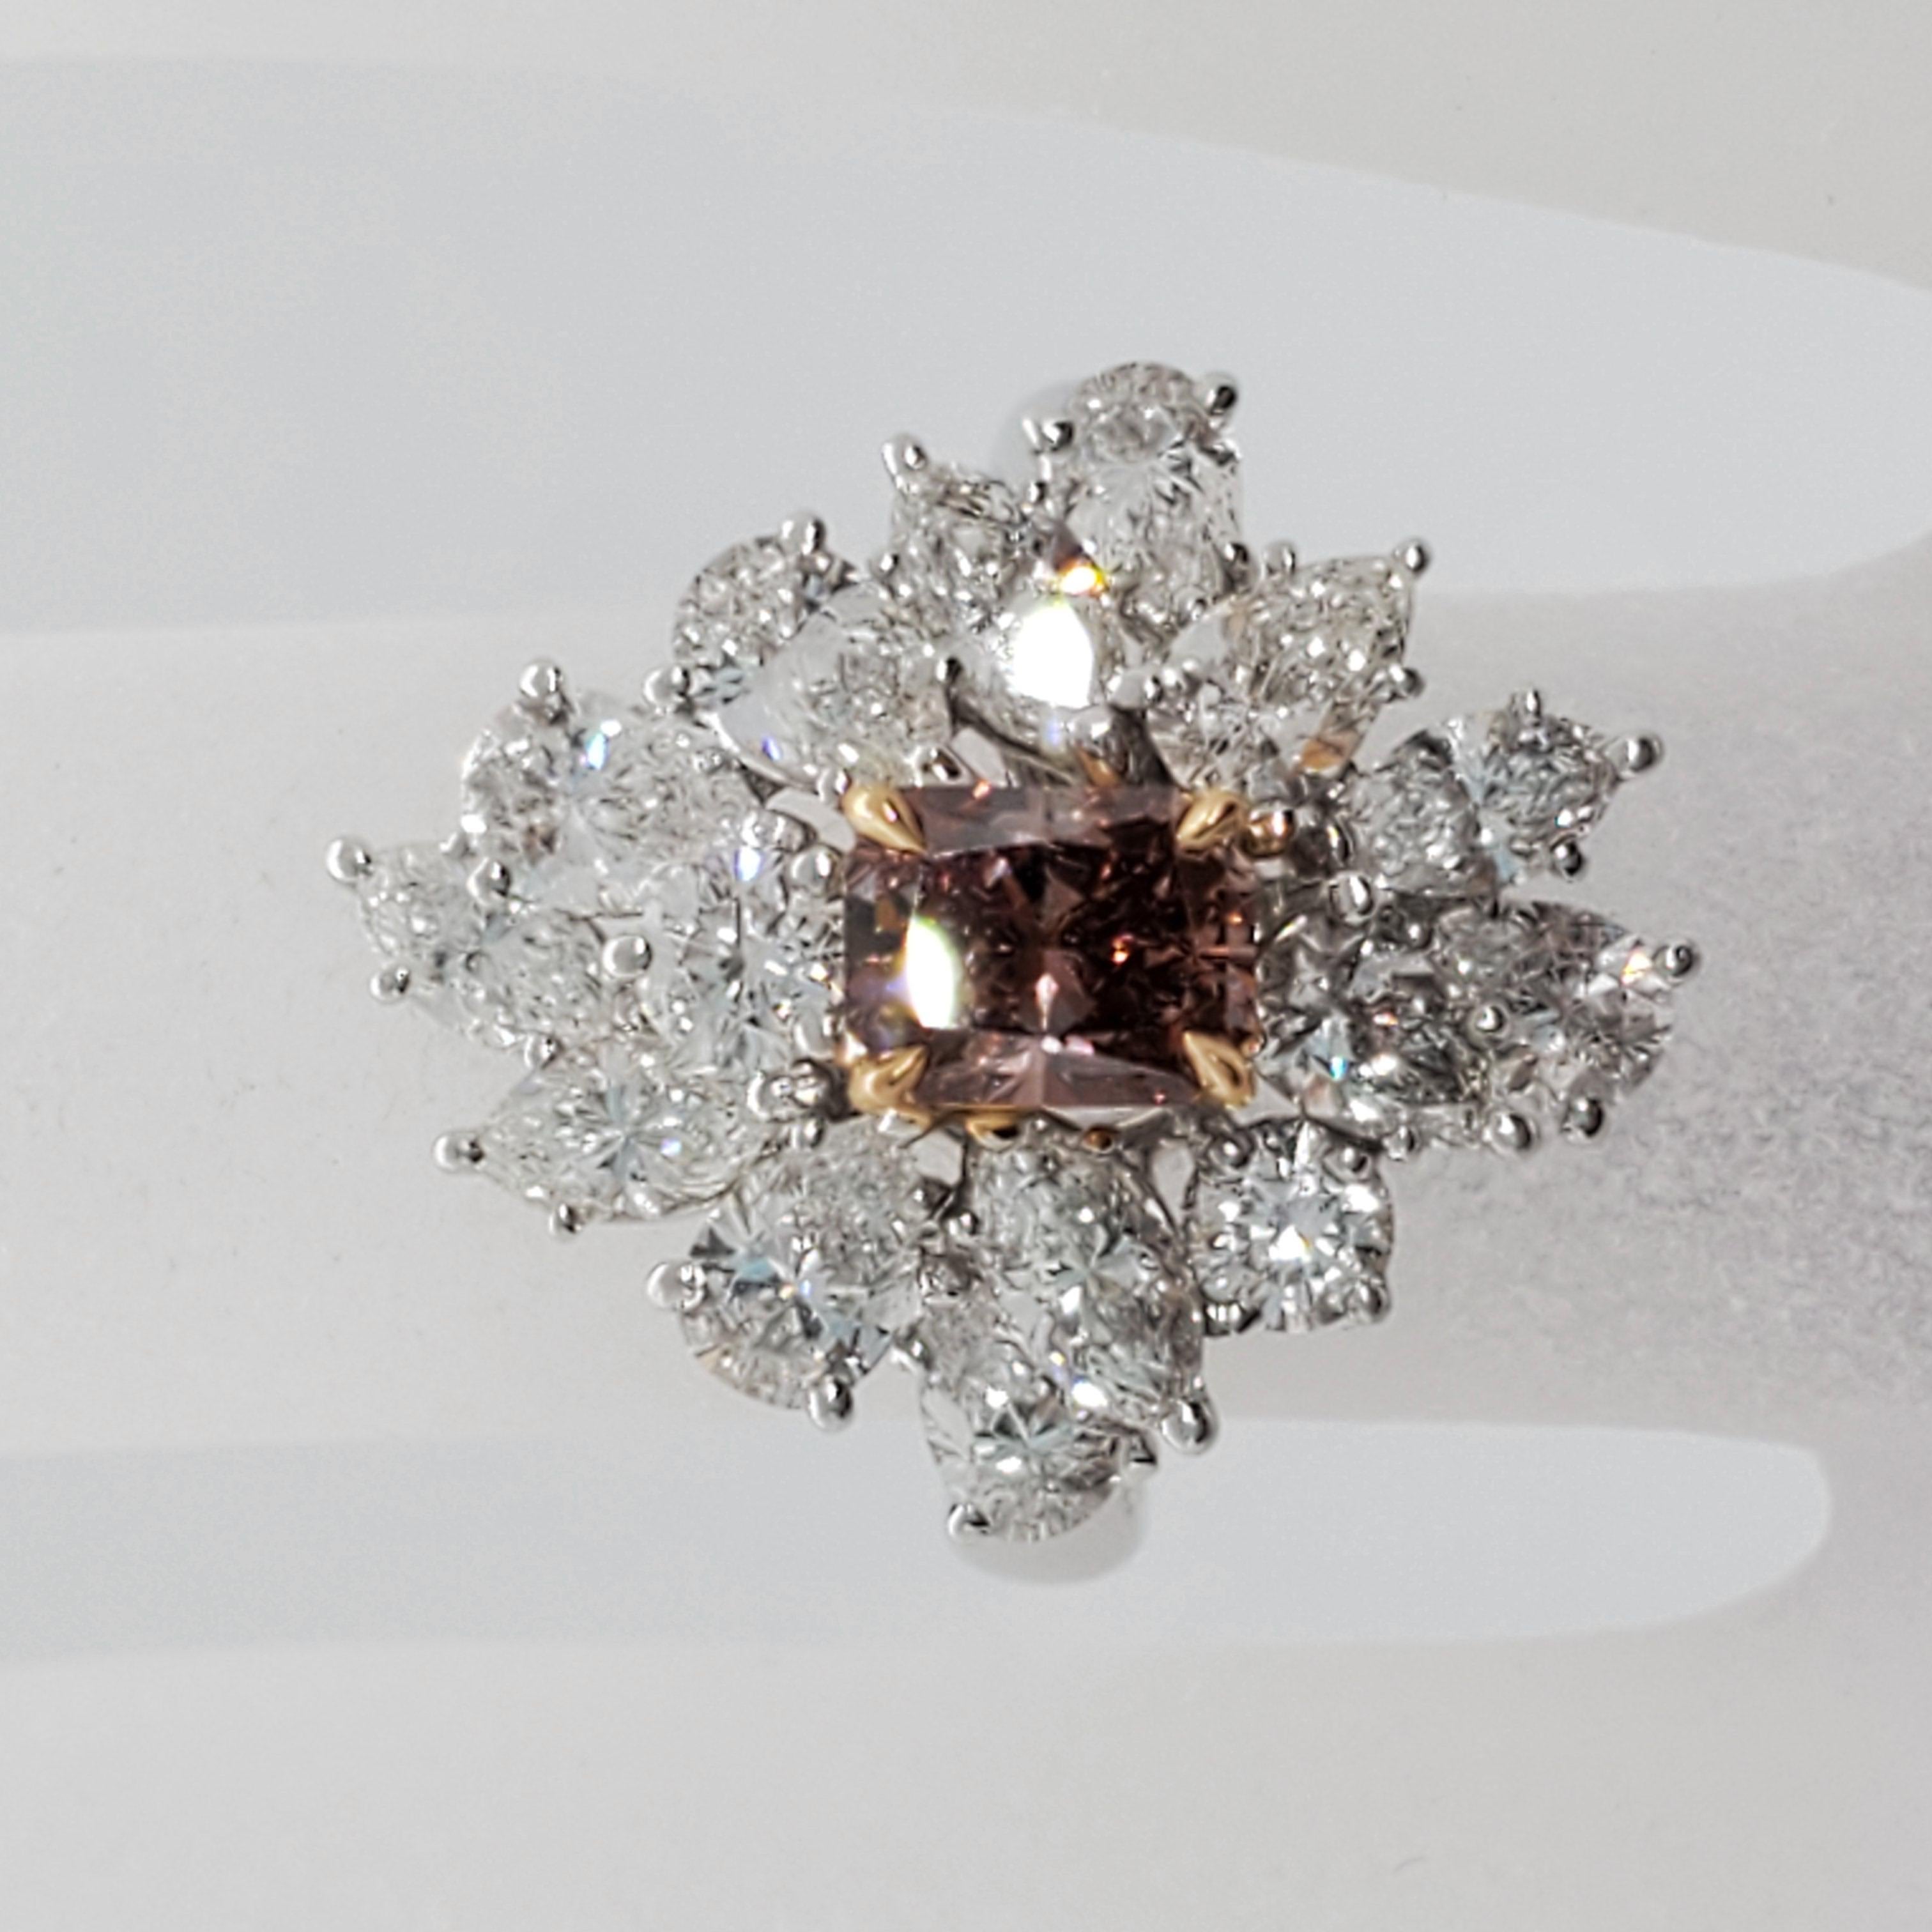 Gorgeous 0.86 ct fancy deep brown pink diamond radiant with 2.33 ct of good quality white diamond marquise, pear shapes, and rounds in a handcrafted 18k yellow gold and platinum mounting.  Size 5.5.  GIA Lab Report 16353492